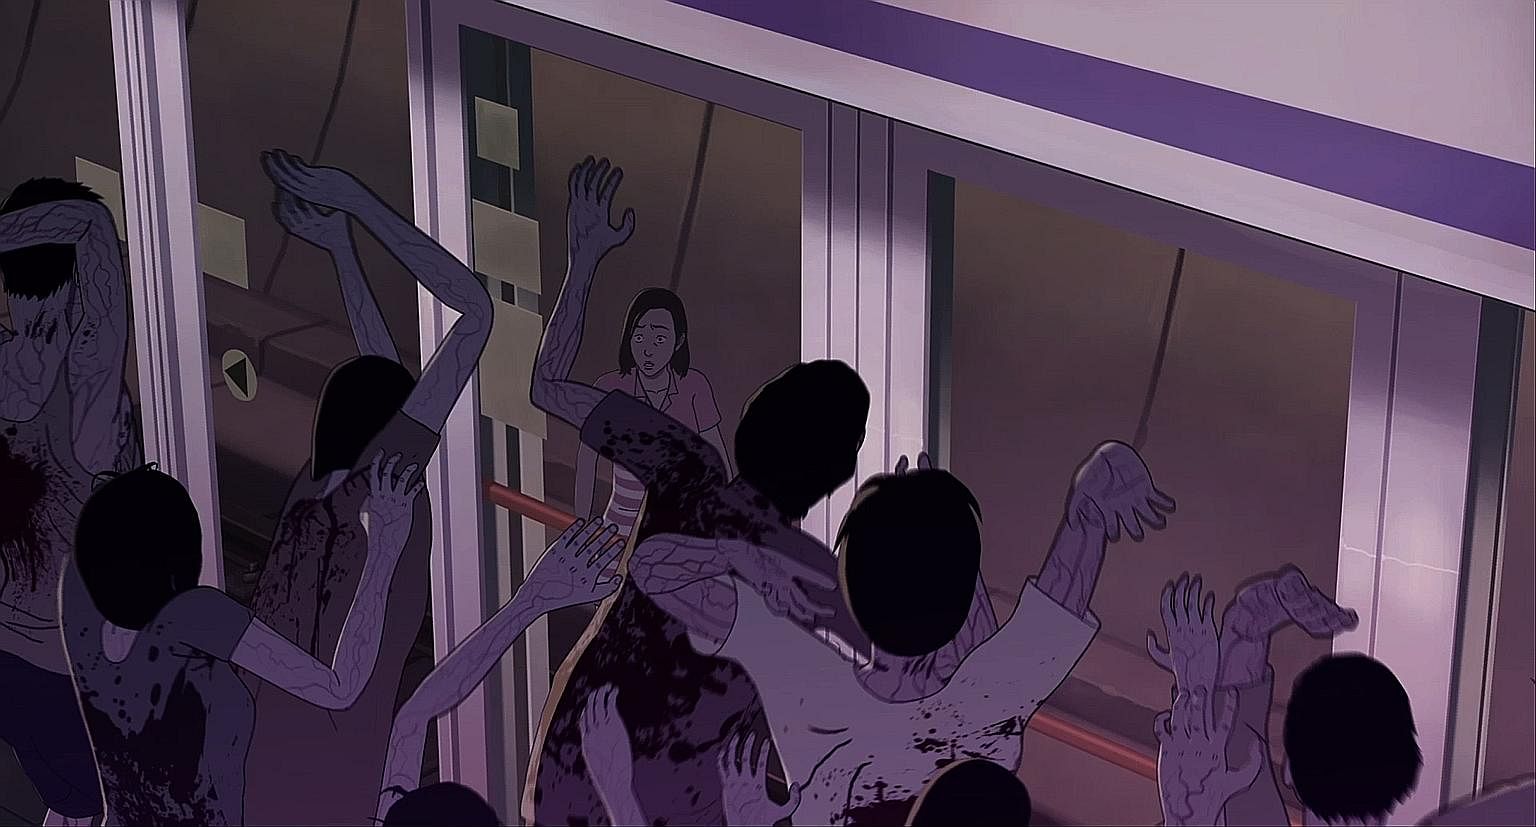 Teenager Hye Sun runs from zombies in Seoul Station (above); Melanie (Sennia Nanua, left) is infected by a spore in The Girl With All The Gifts; and Daniel Radcliffe (far left) is an FBI agent acting as bait to draw out terrorists in Imperium.